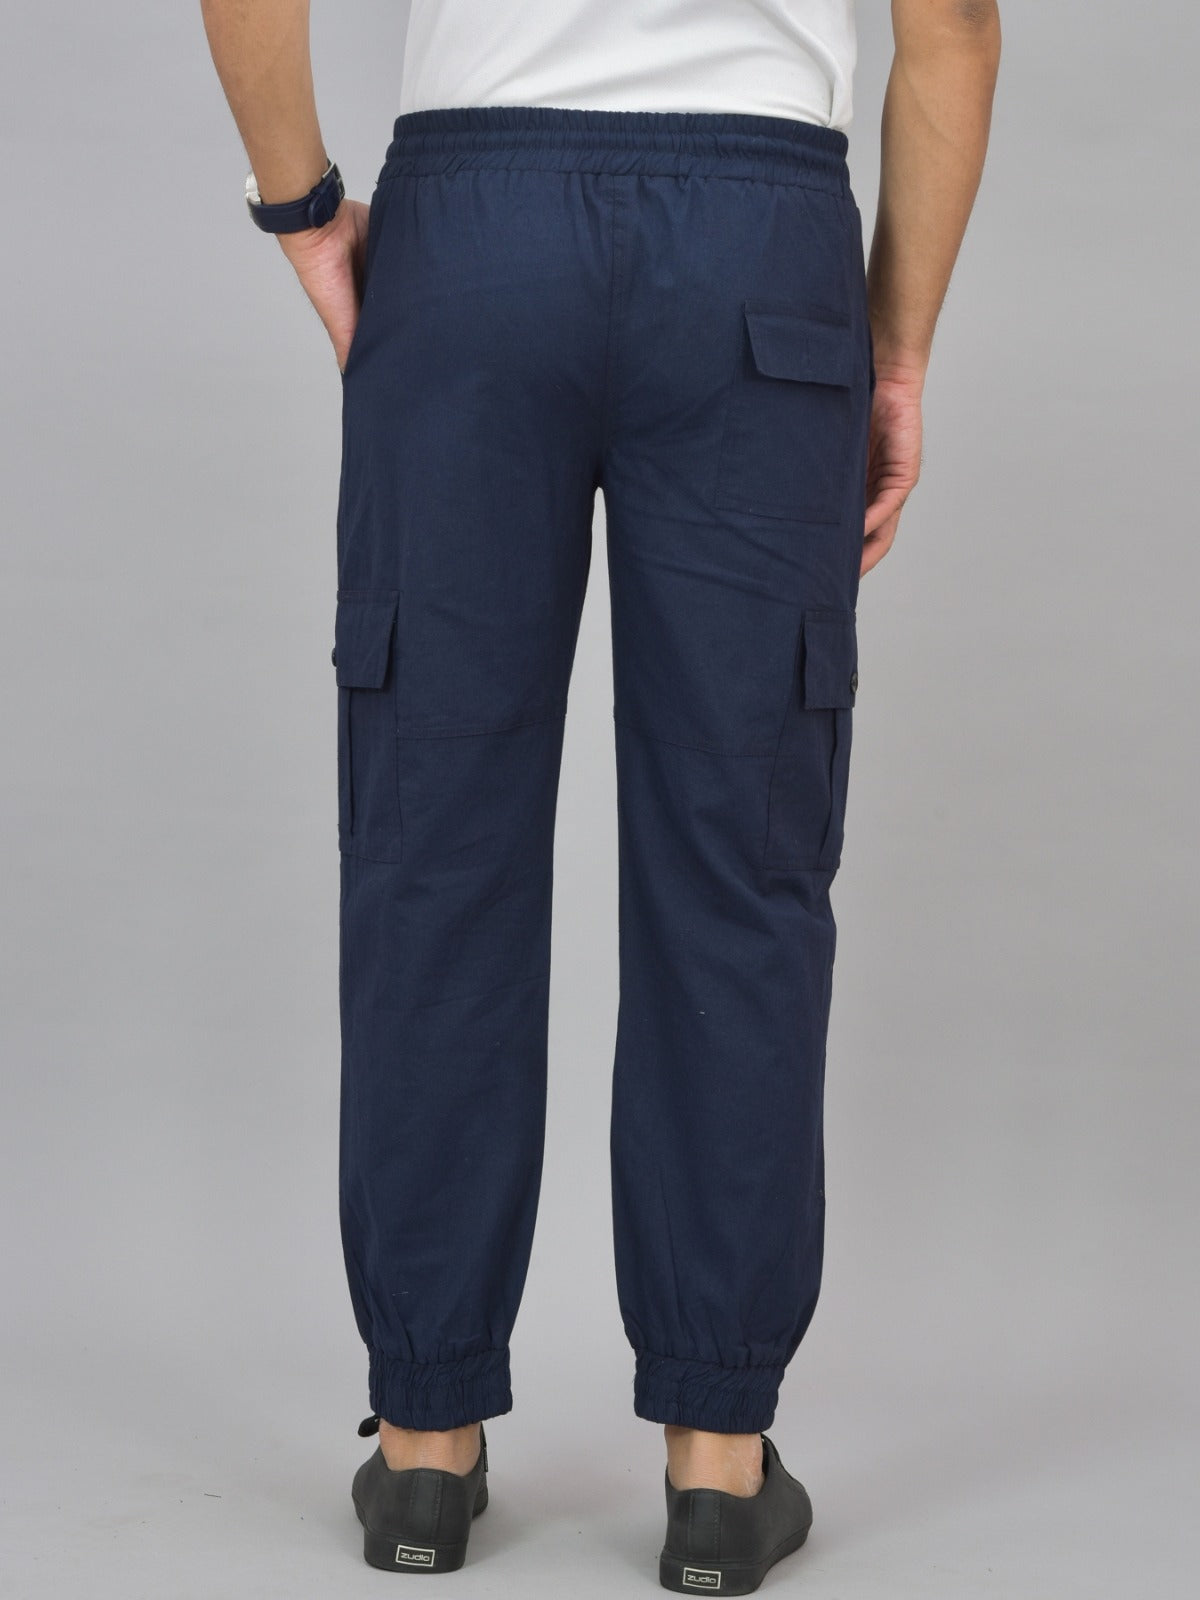 Buy Gray and Navy Blue Combo of 2 Four Pocket Cargo Pants Pure Cotton for  Best Price, Reviews, Free Shipping